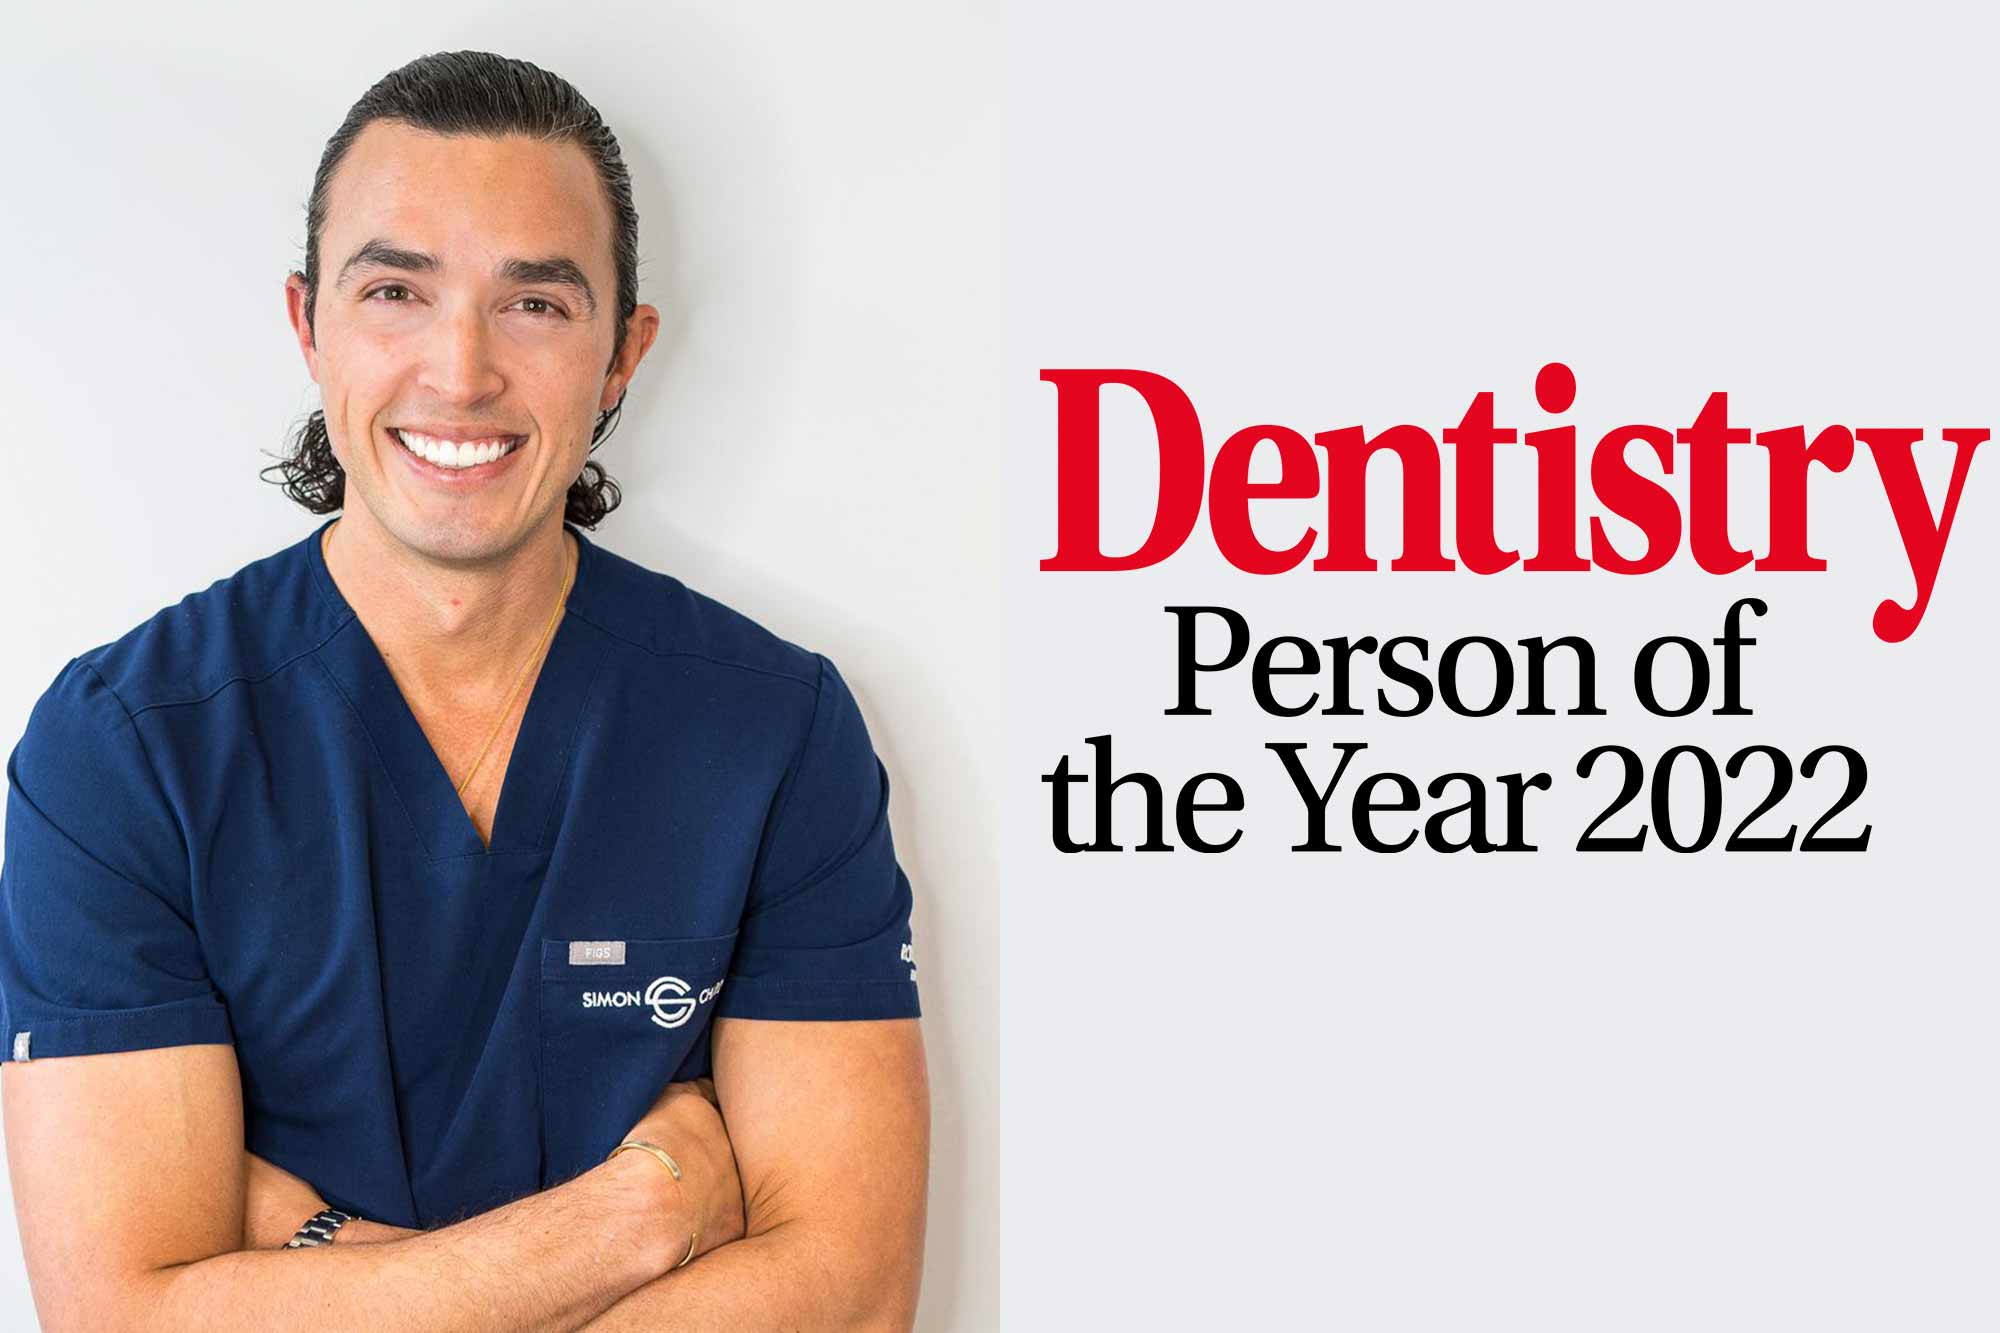 Dentistry's Person of the Year 2022: Simon Chard